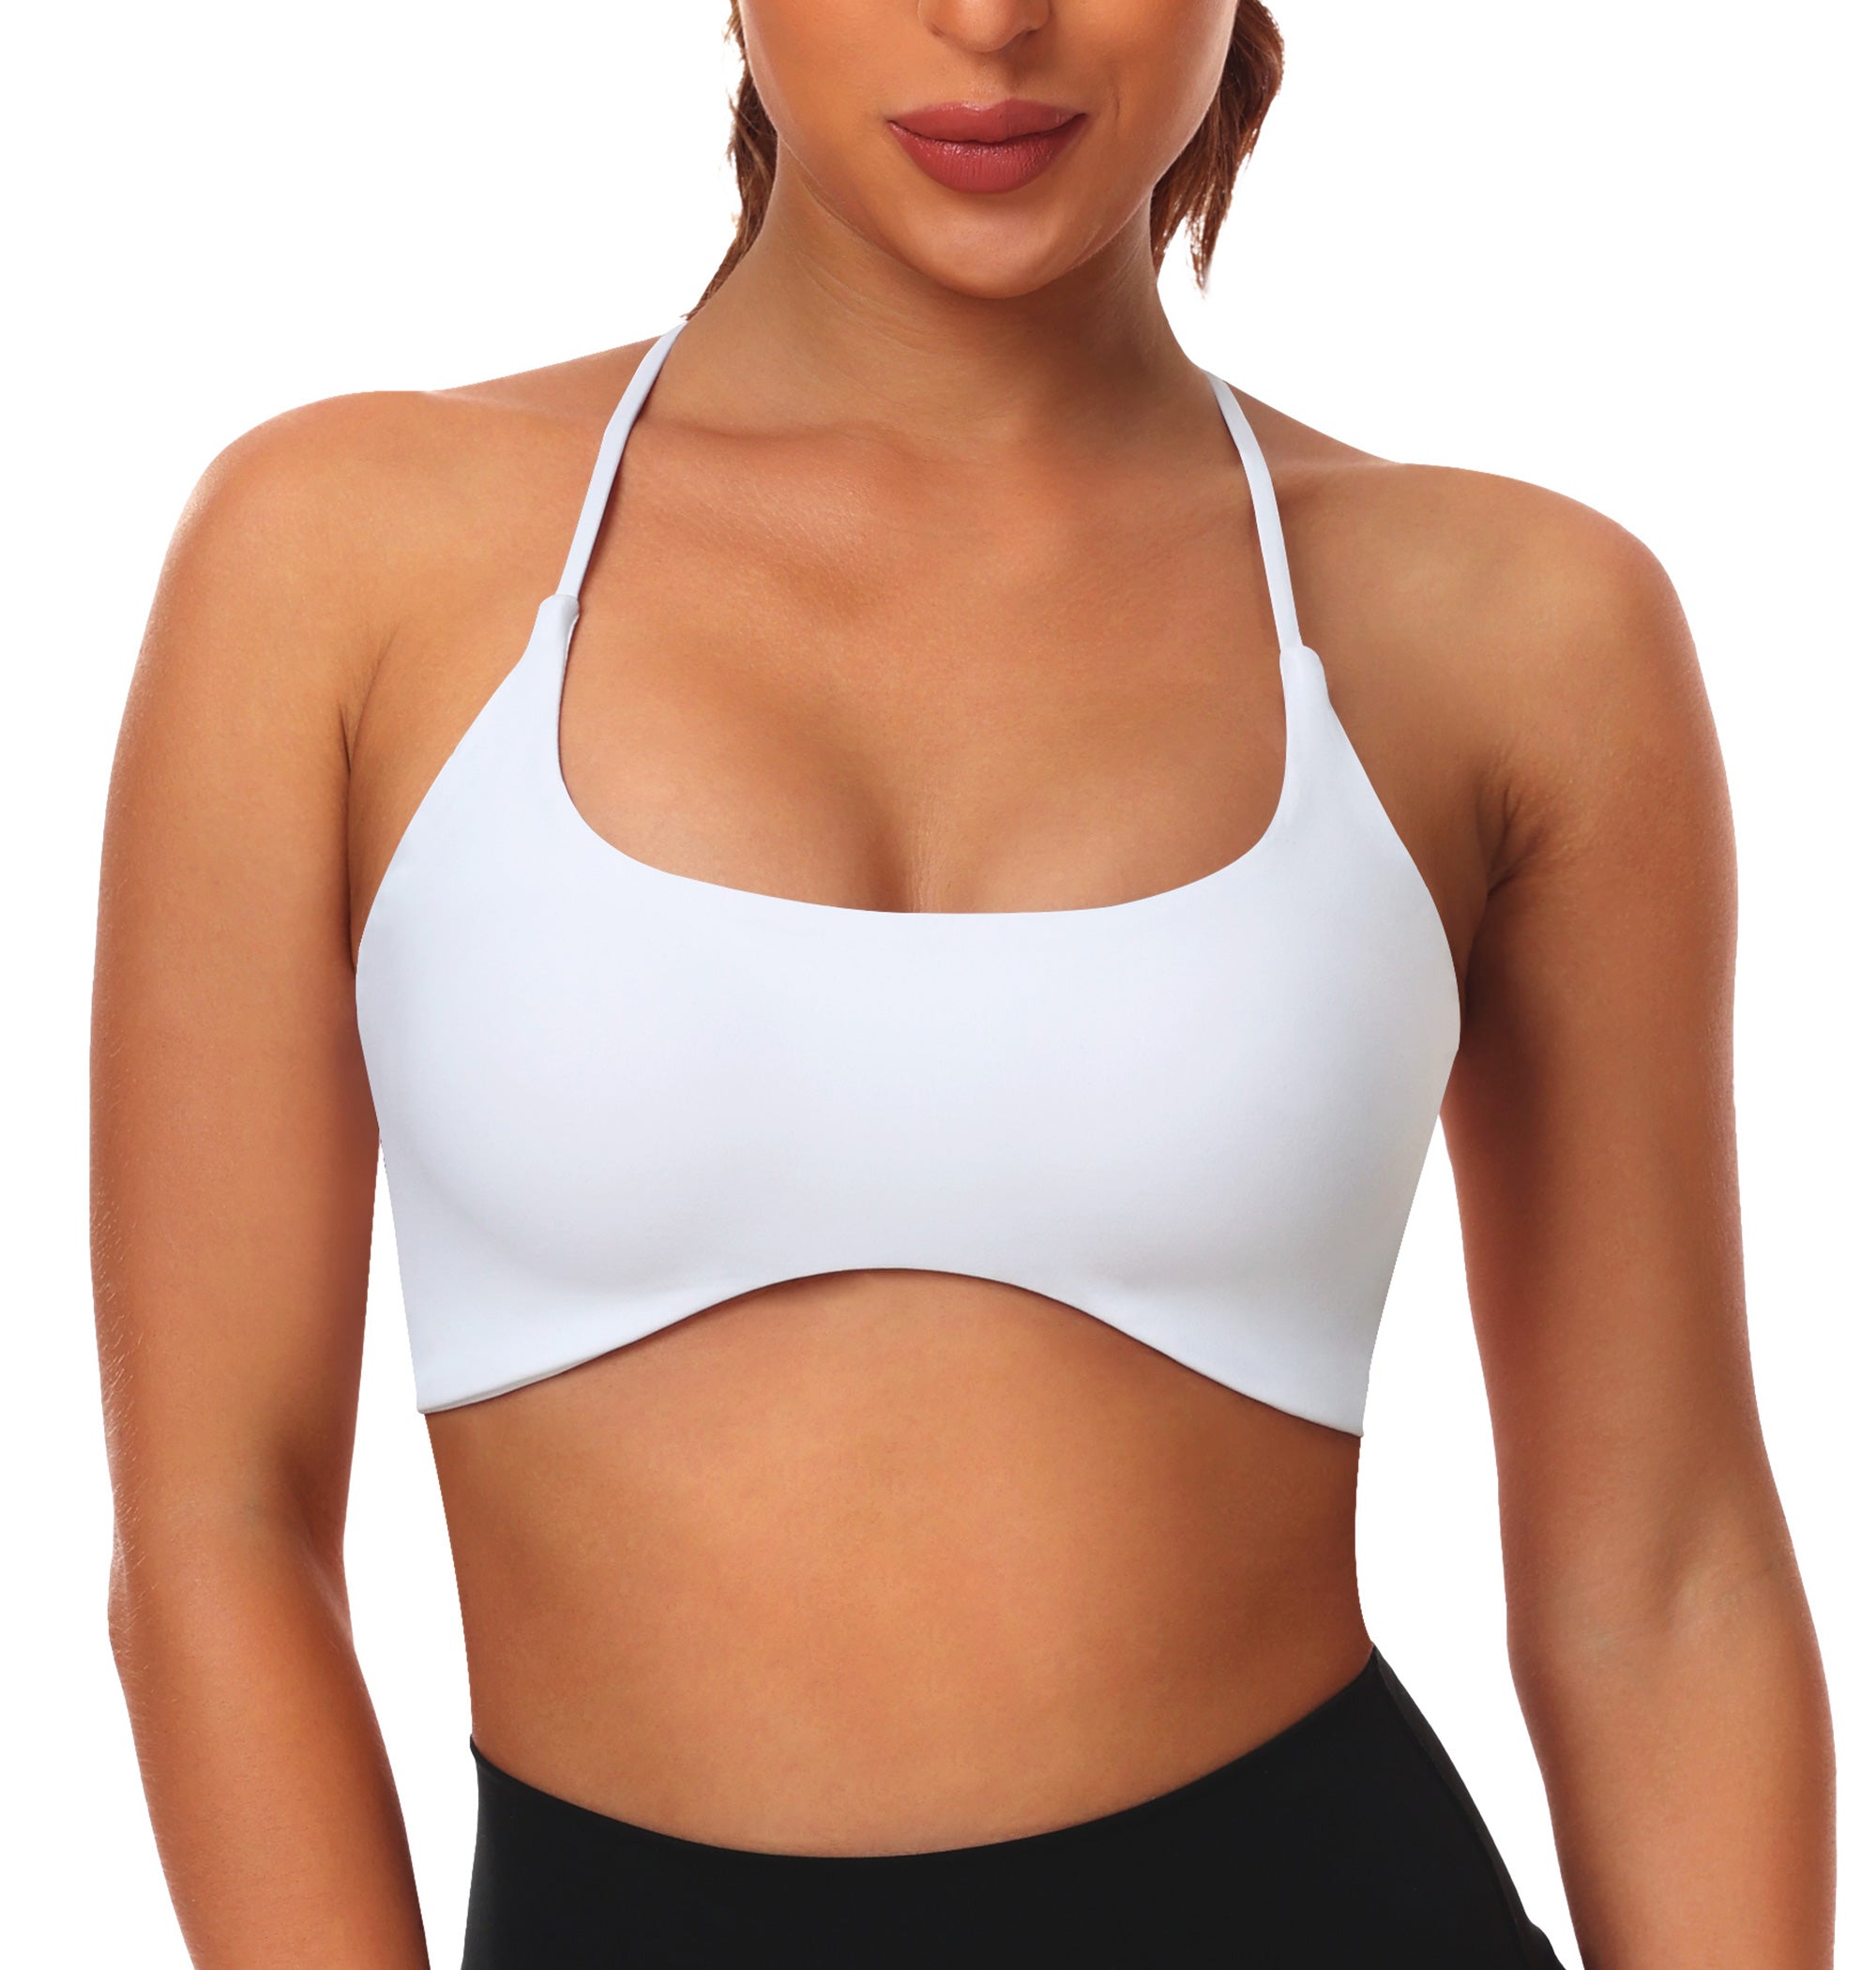 GOFIEP Backless Sports Bras for Women Bras with Sexy Crisscross Built-in Bra Tank Tops for Running Gym Workouts